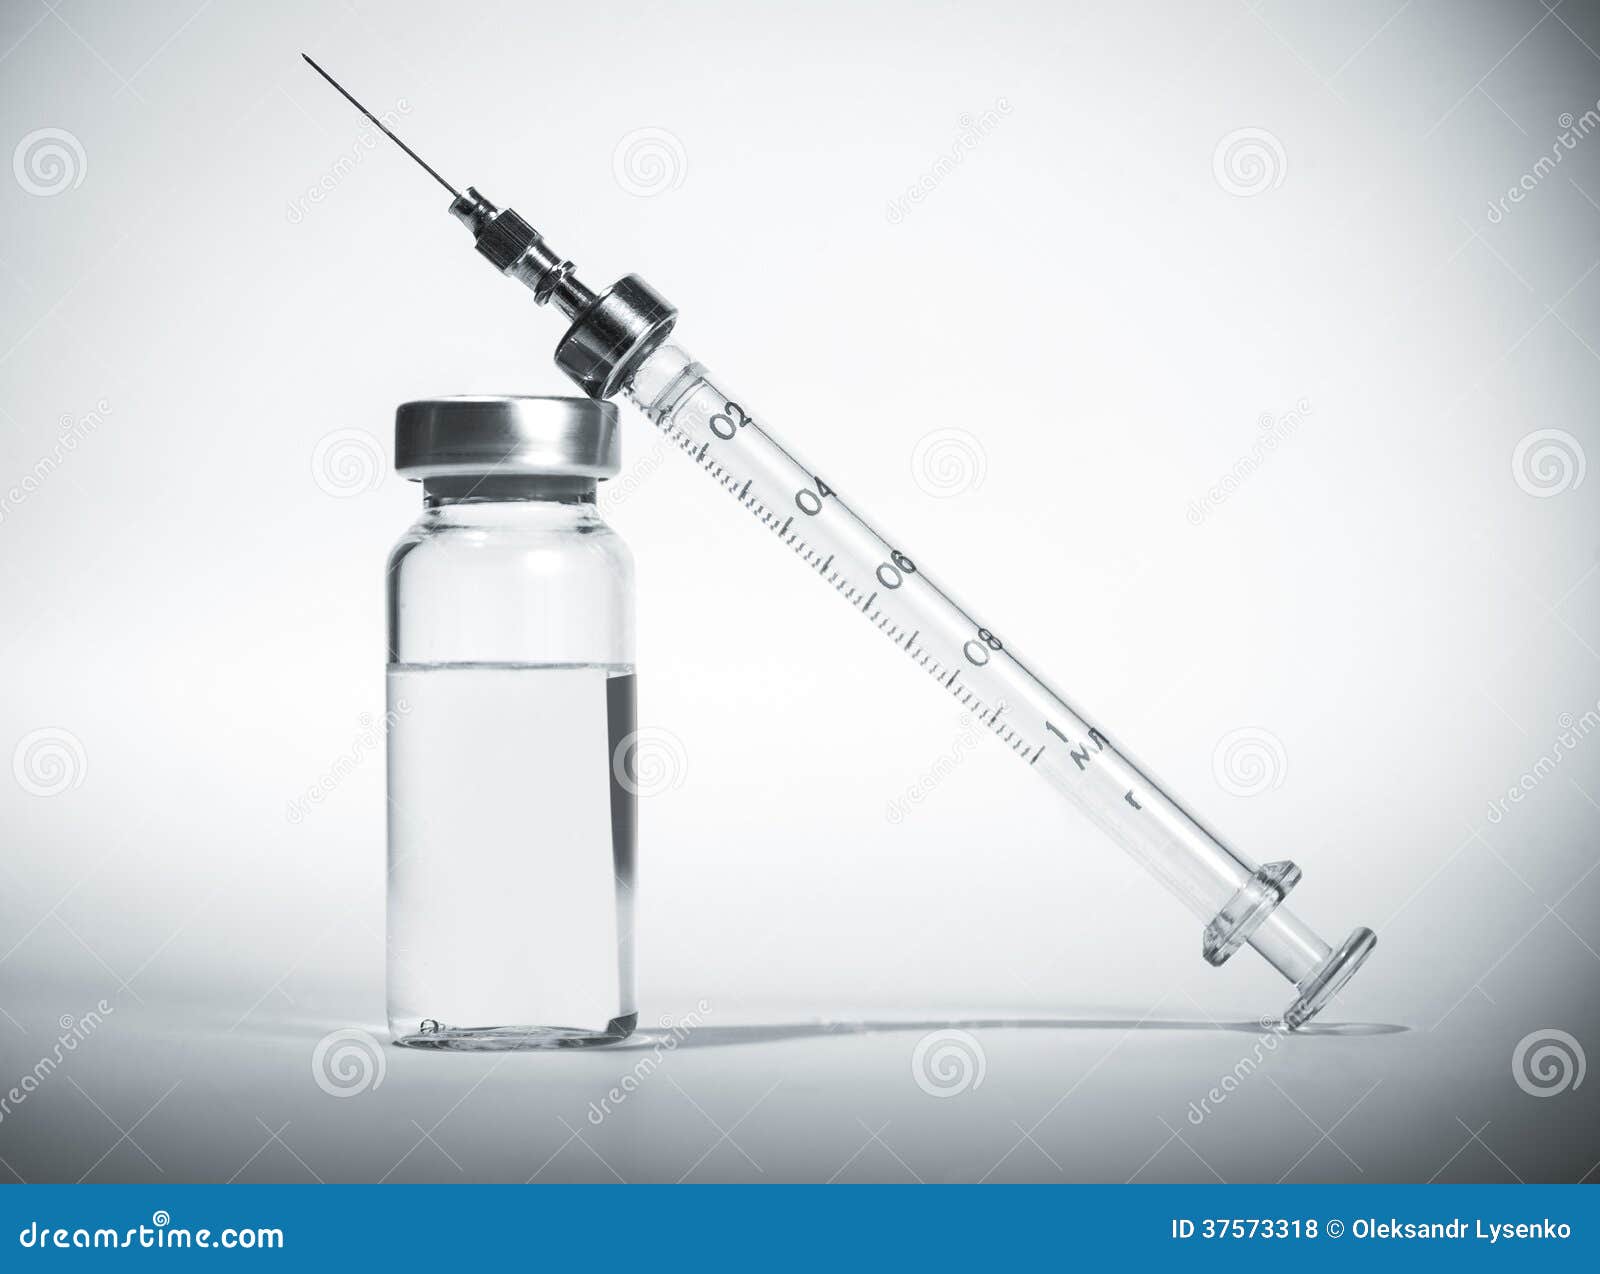 syringe with vial of medication closeup